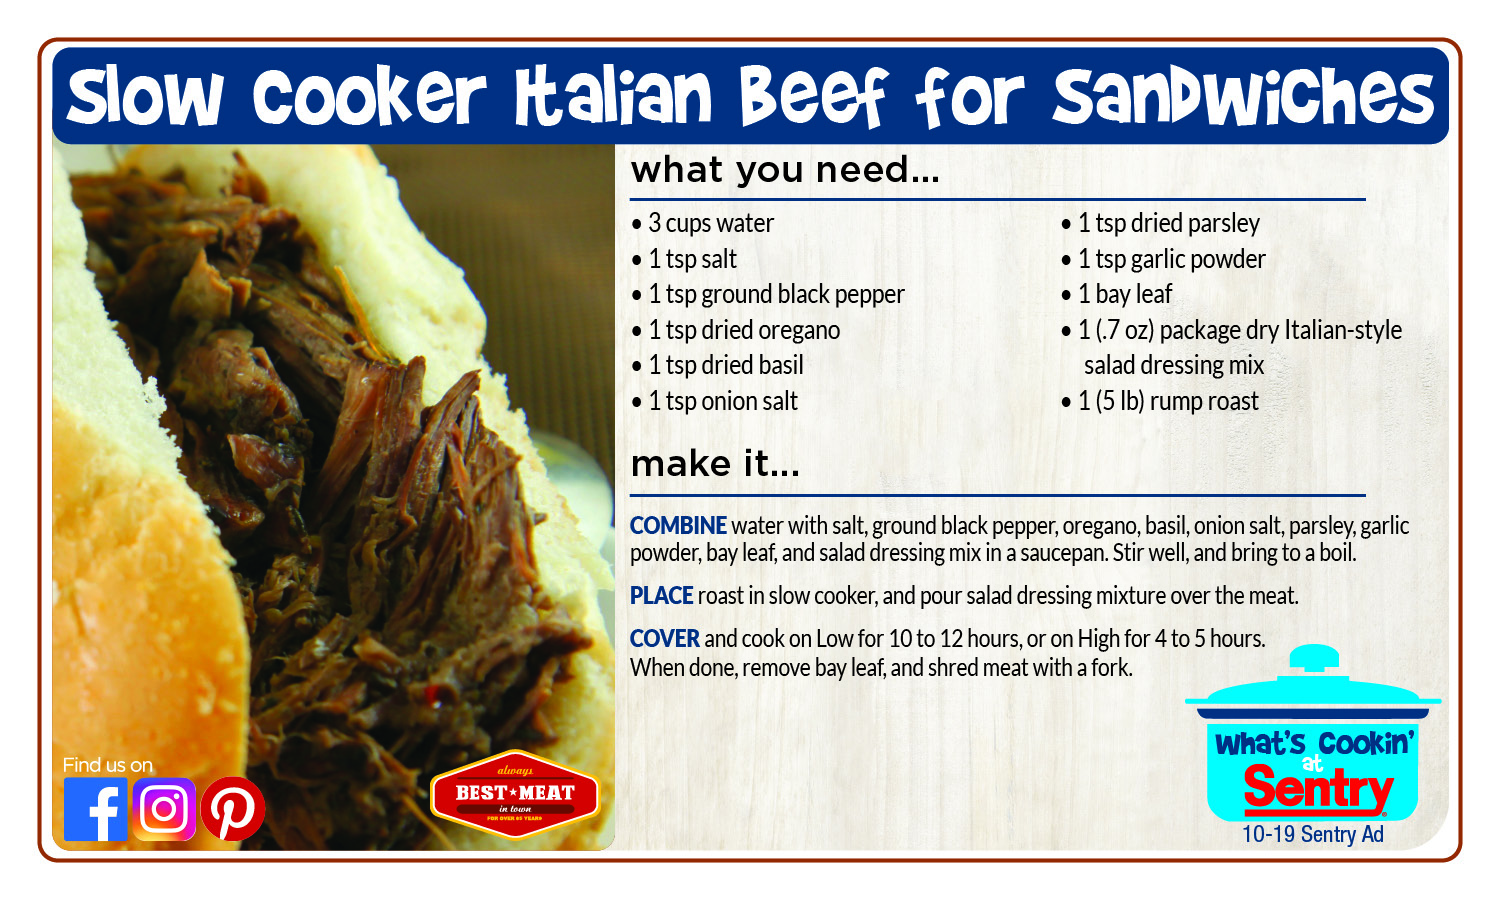 Recipe: Slow Cooker Italian Beef for Sandwiches